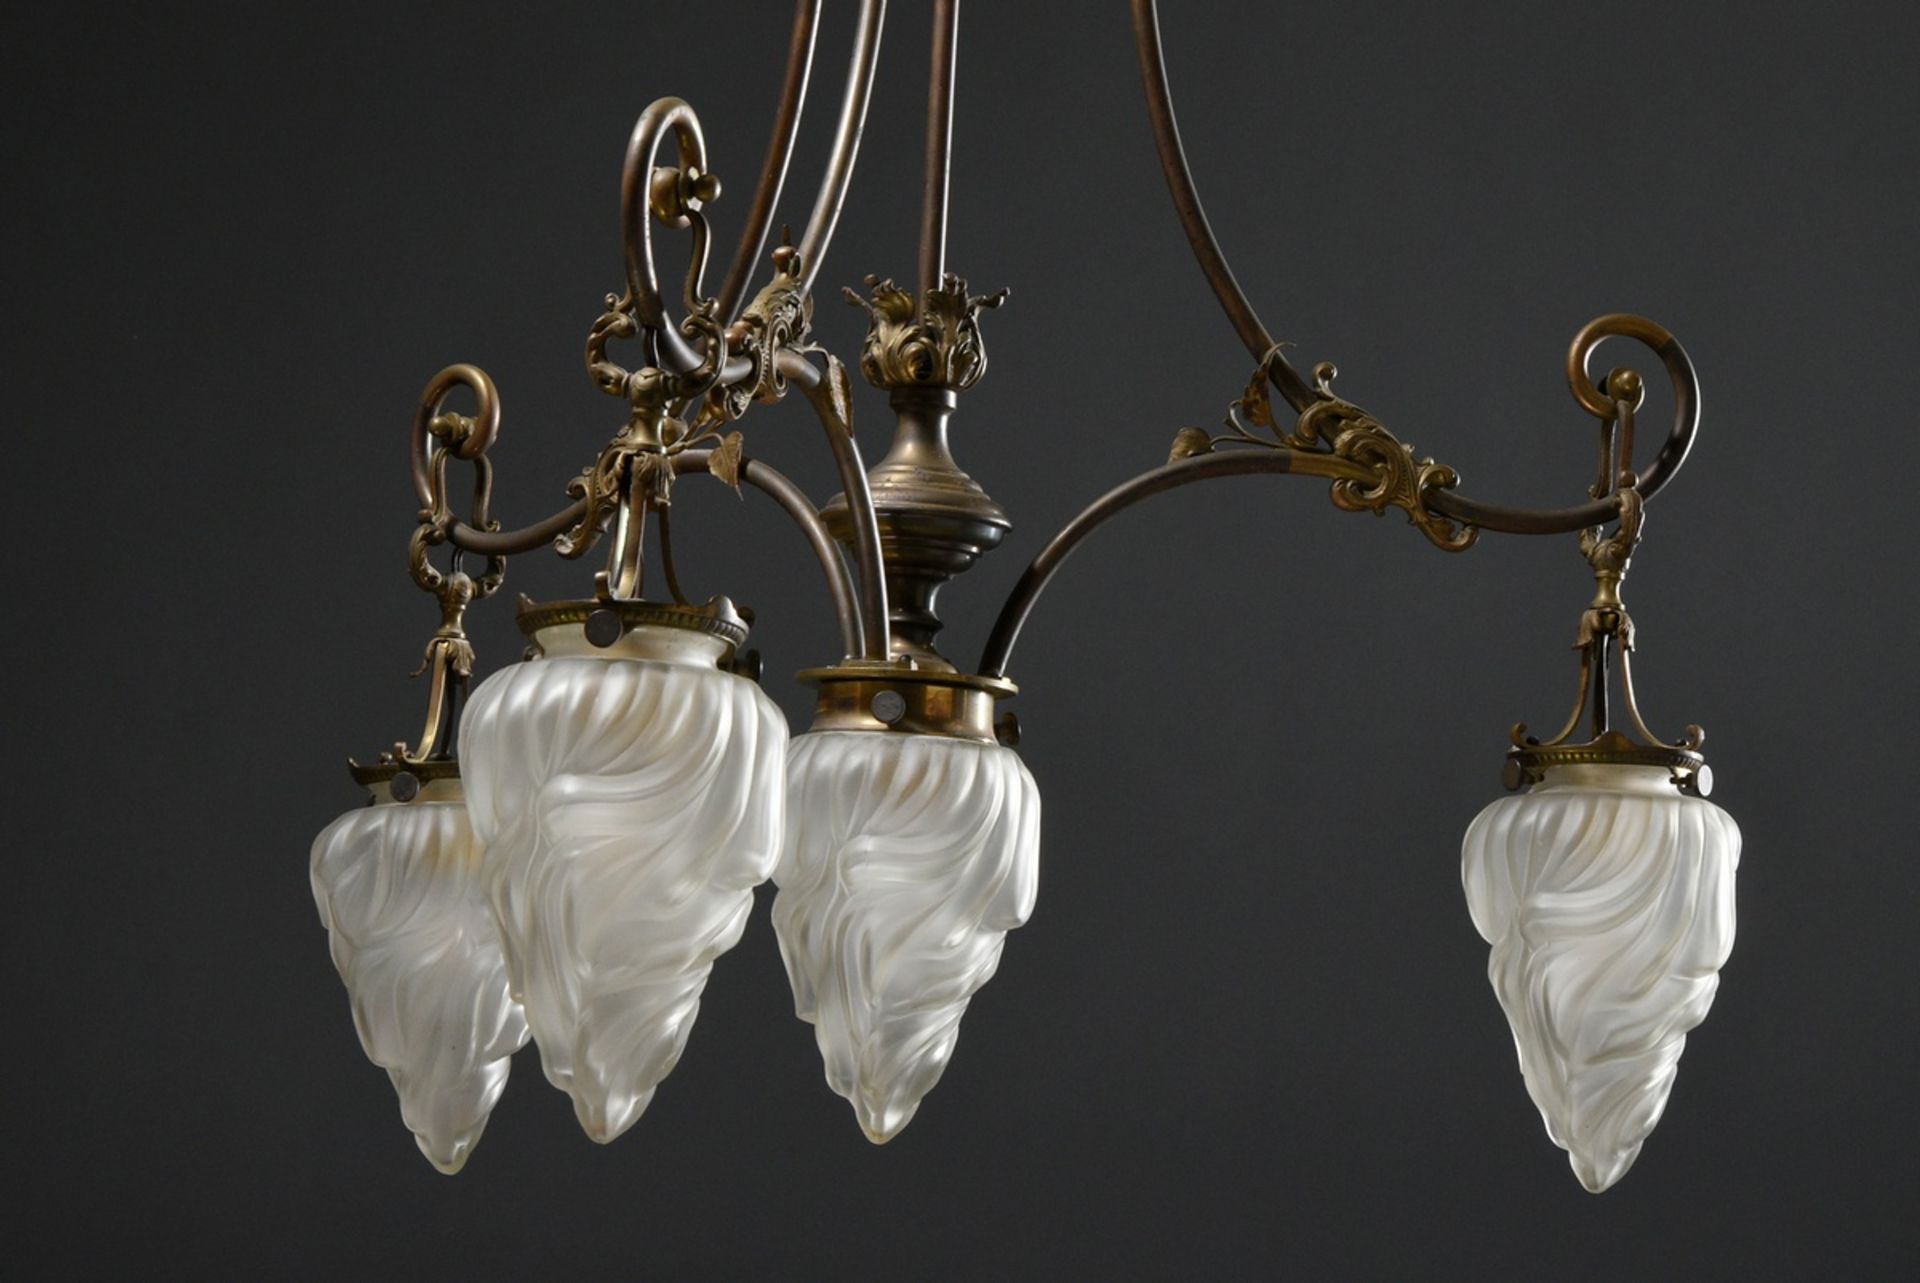 Wilhelminian period ceiling lamp with 4 frosted "flames" glass domes on brass frame with floral dec - Image 8 of 12